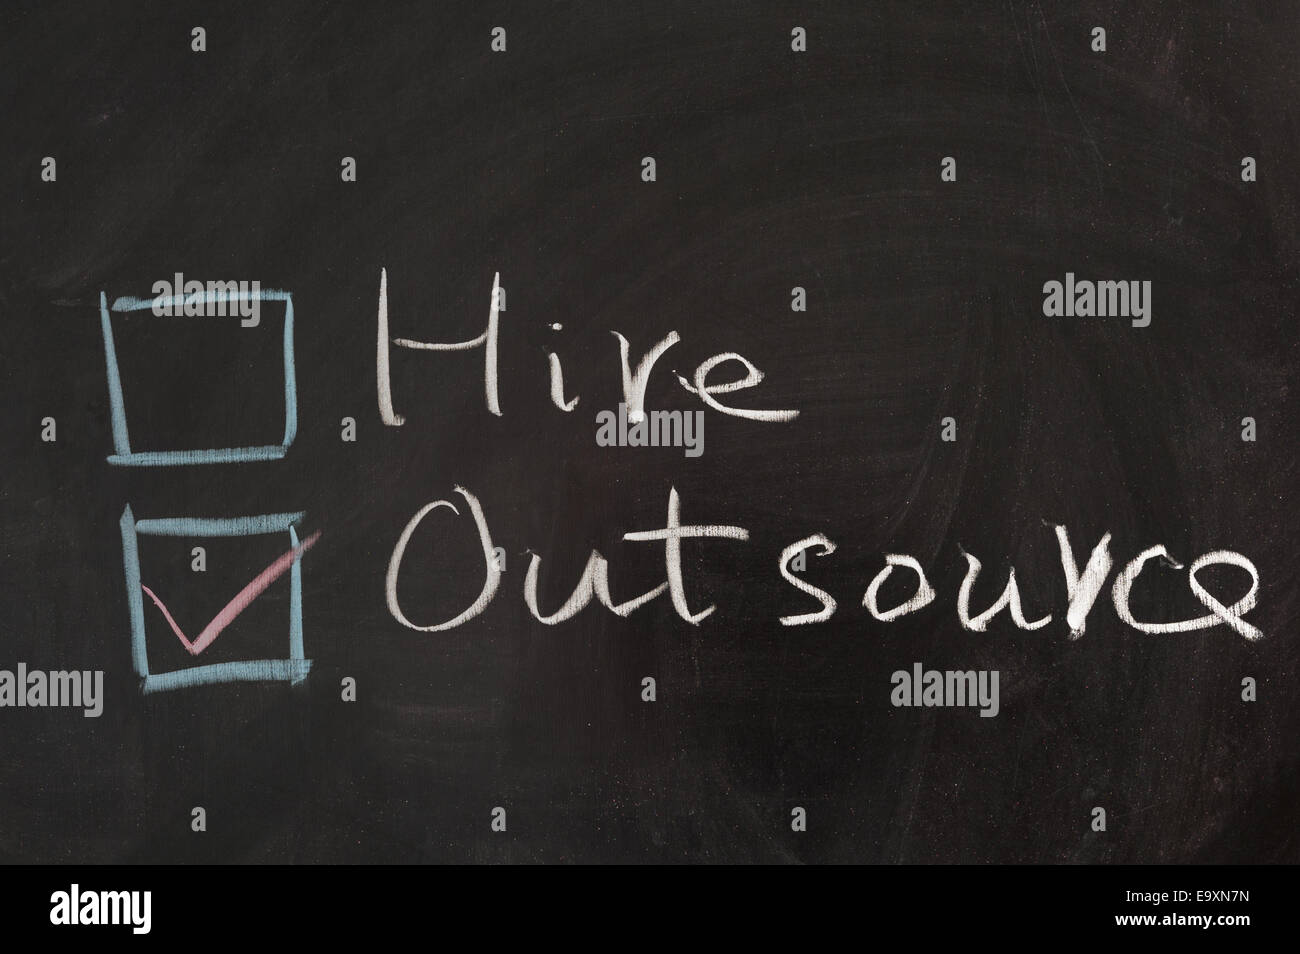 Choosing from hire and outsource concept words on blackboard Stock Photo